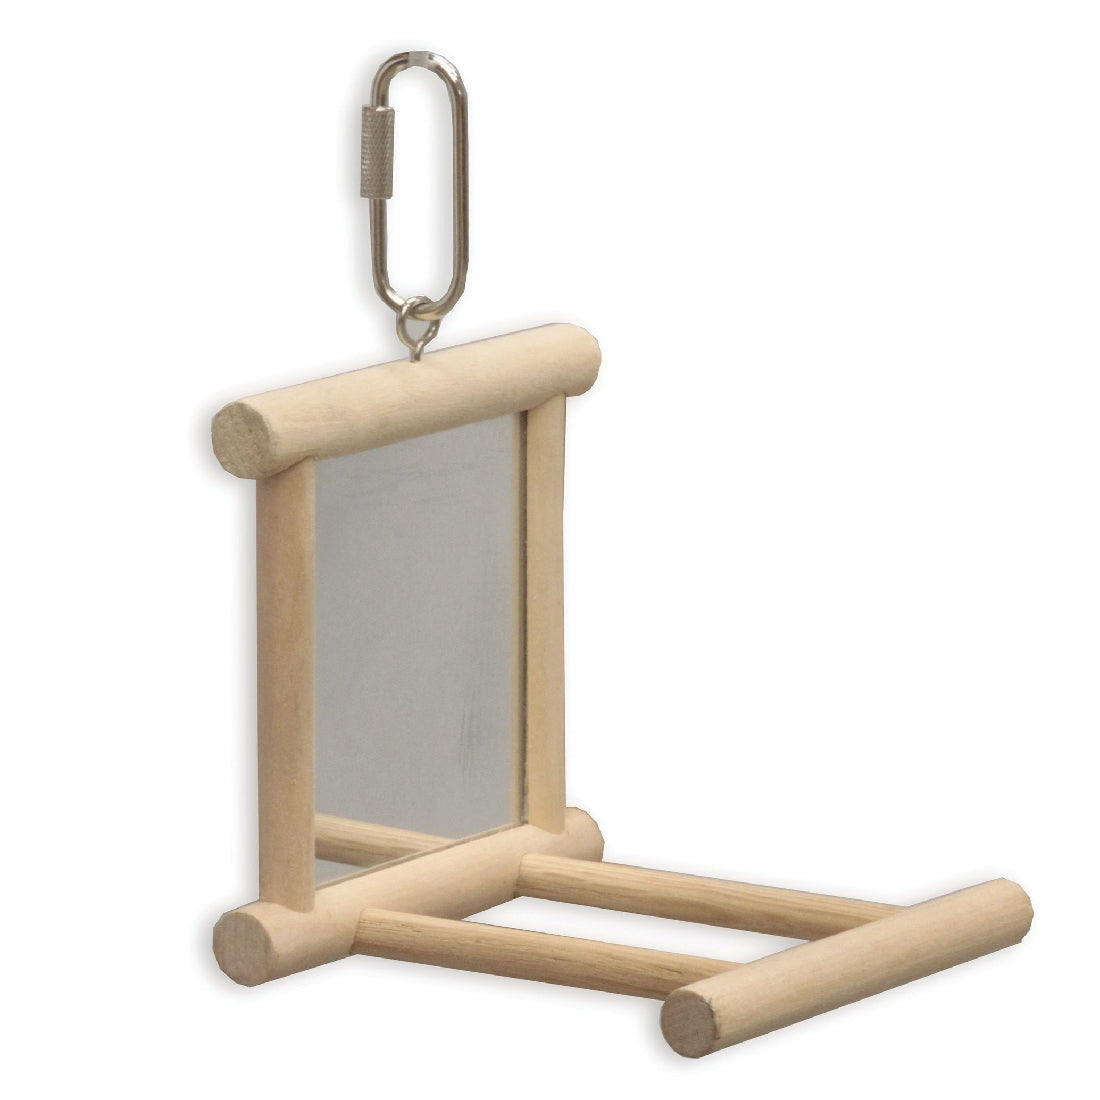 Wooden bird toy with mirror and perch, attached by metal clip.